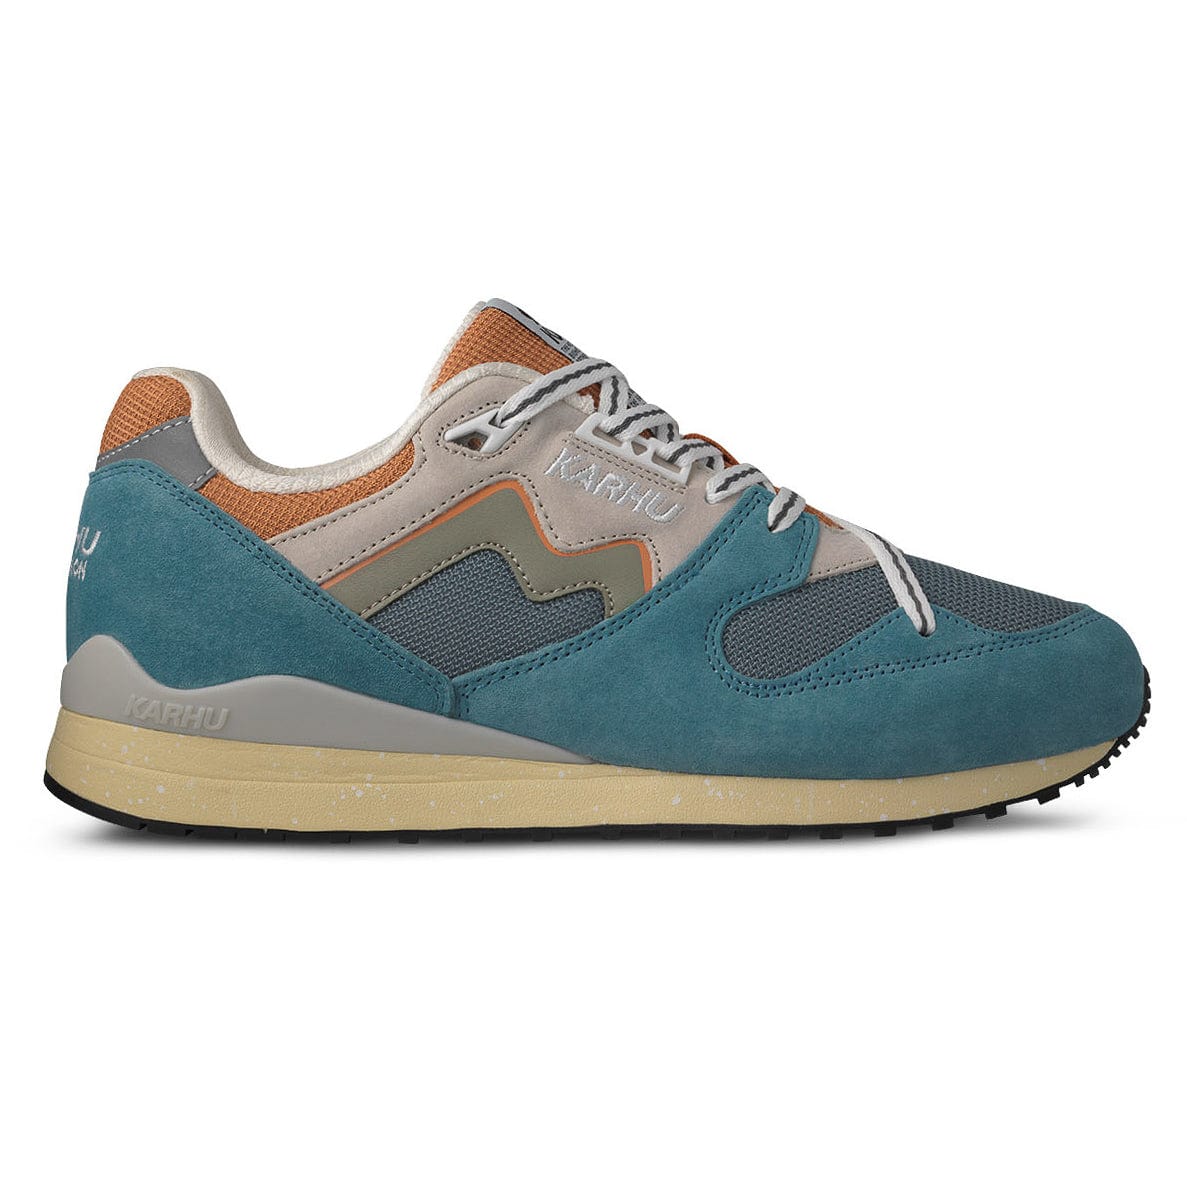 Synchron Classic in reef waters and abbey stone - Karhu - State Of Flux